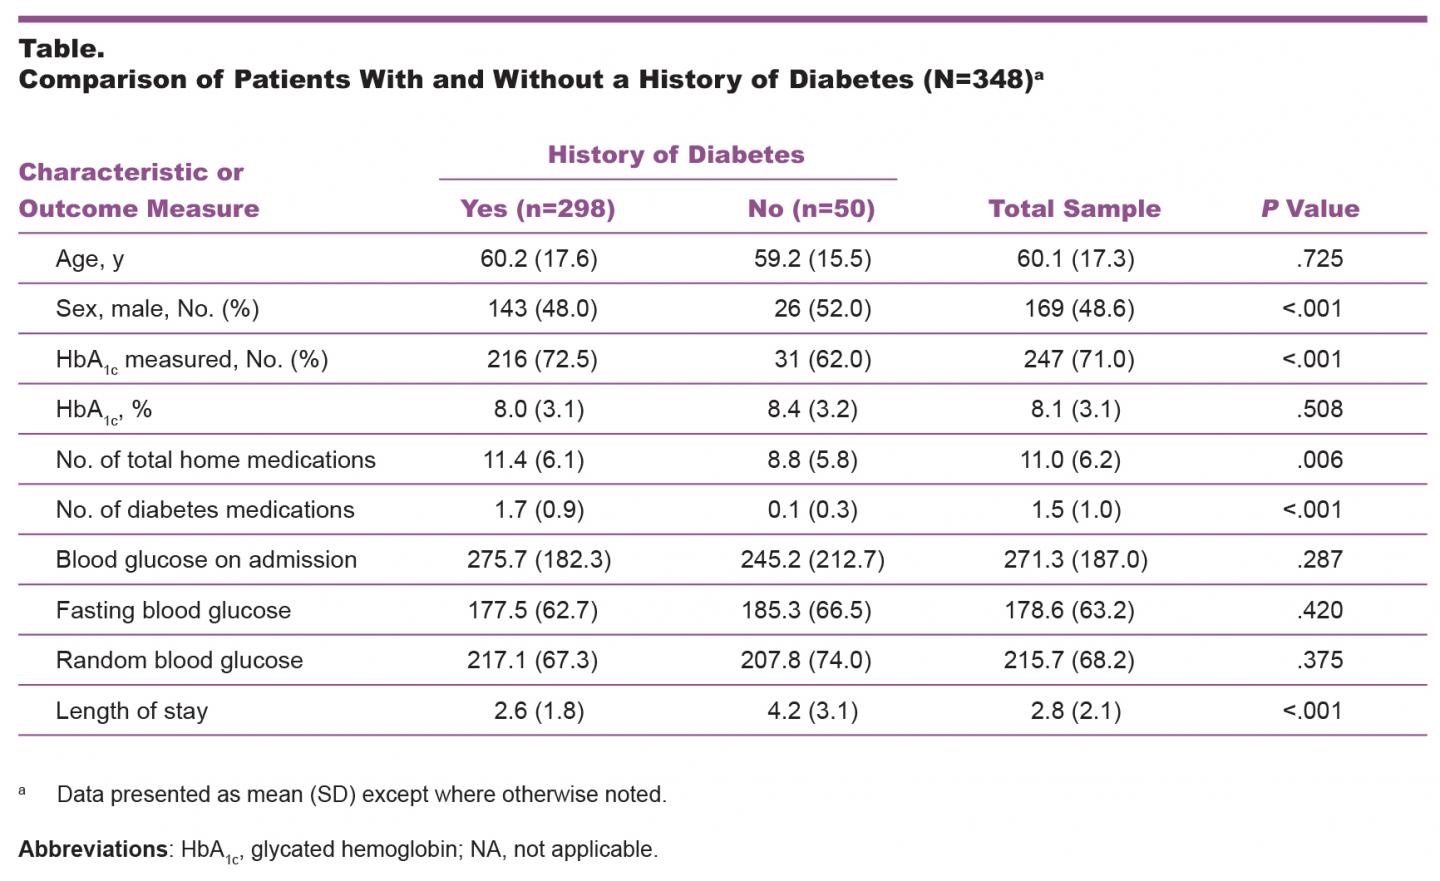 Comparison of Patients With and Without a History of Diabetes